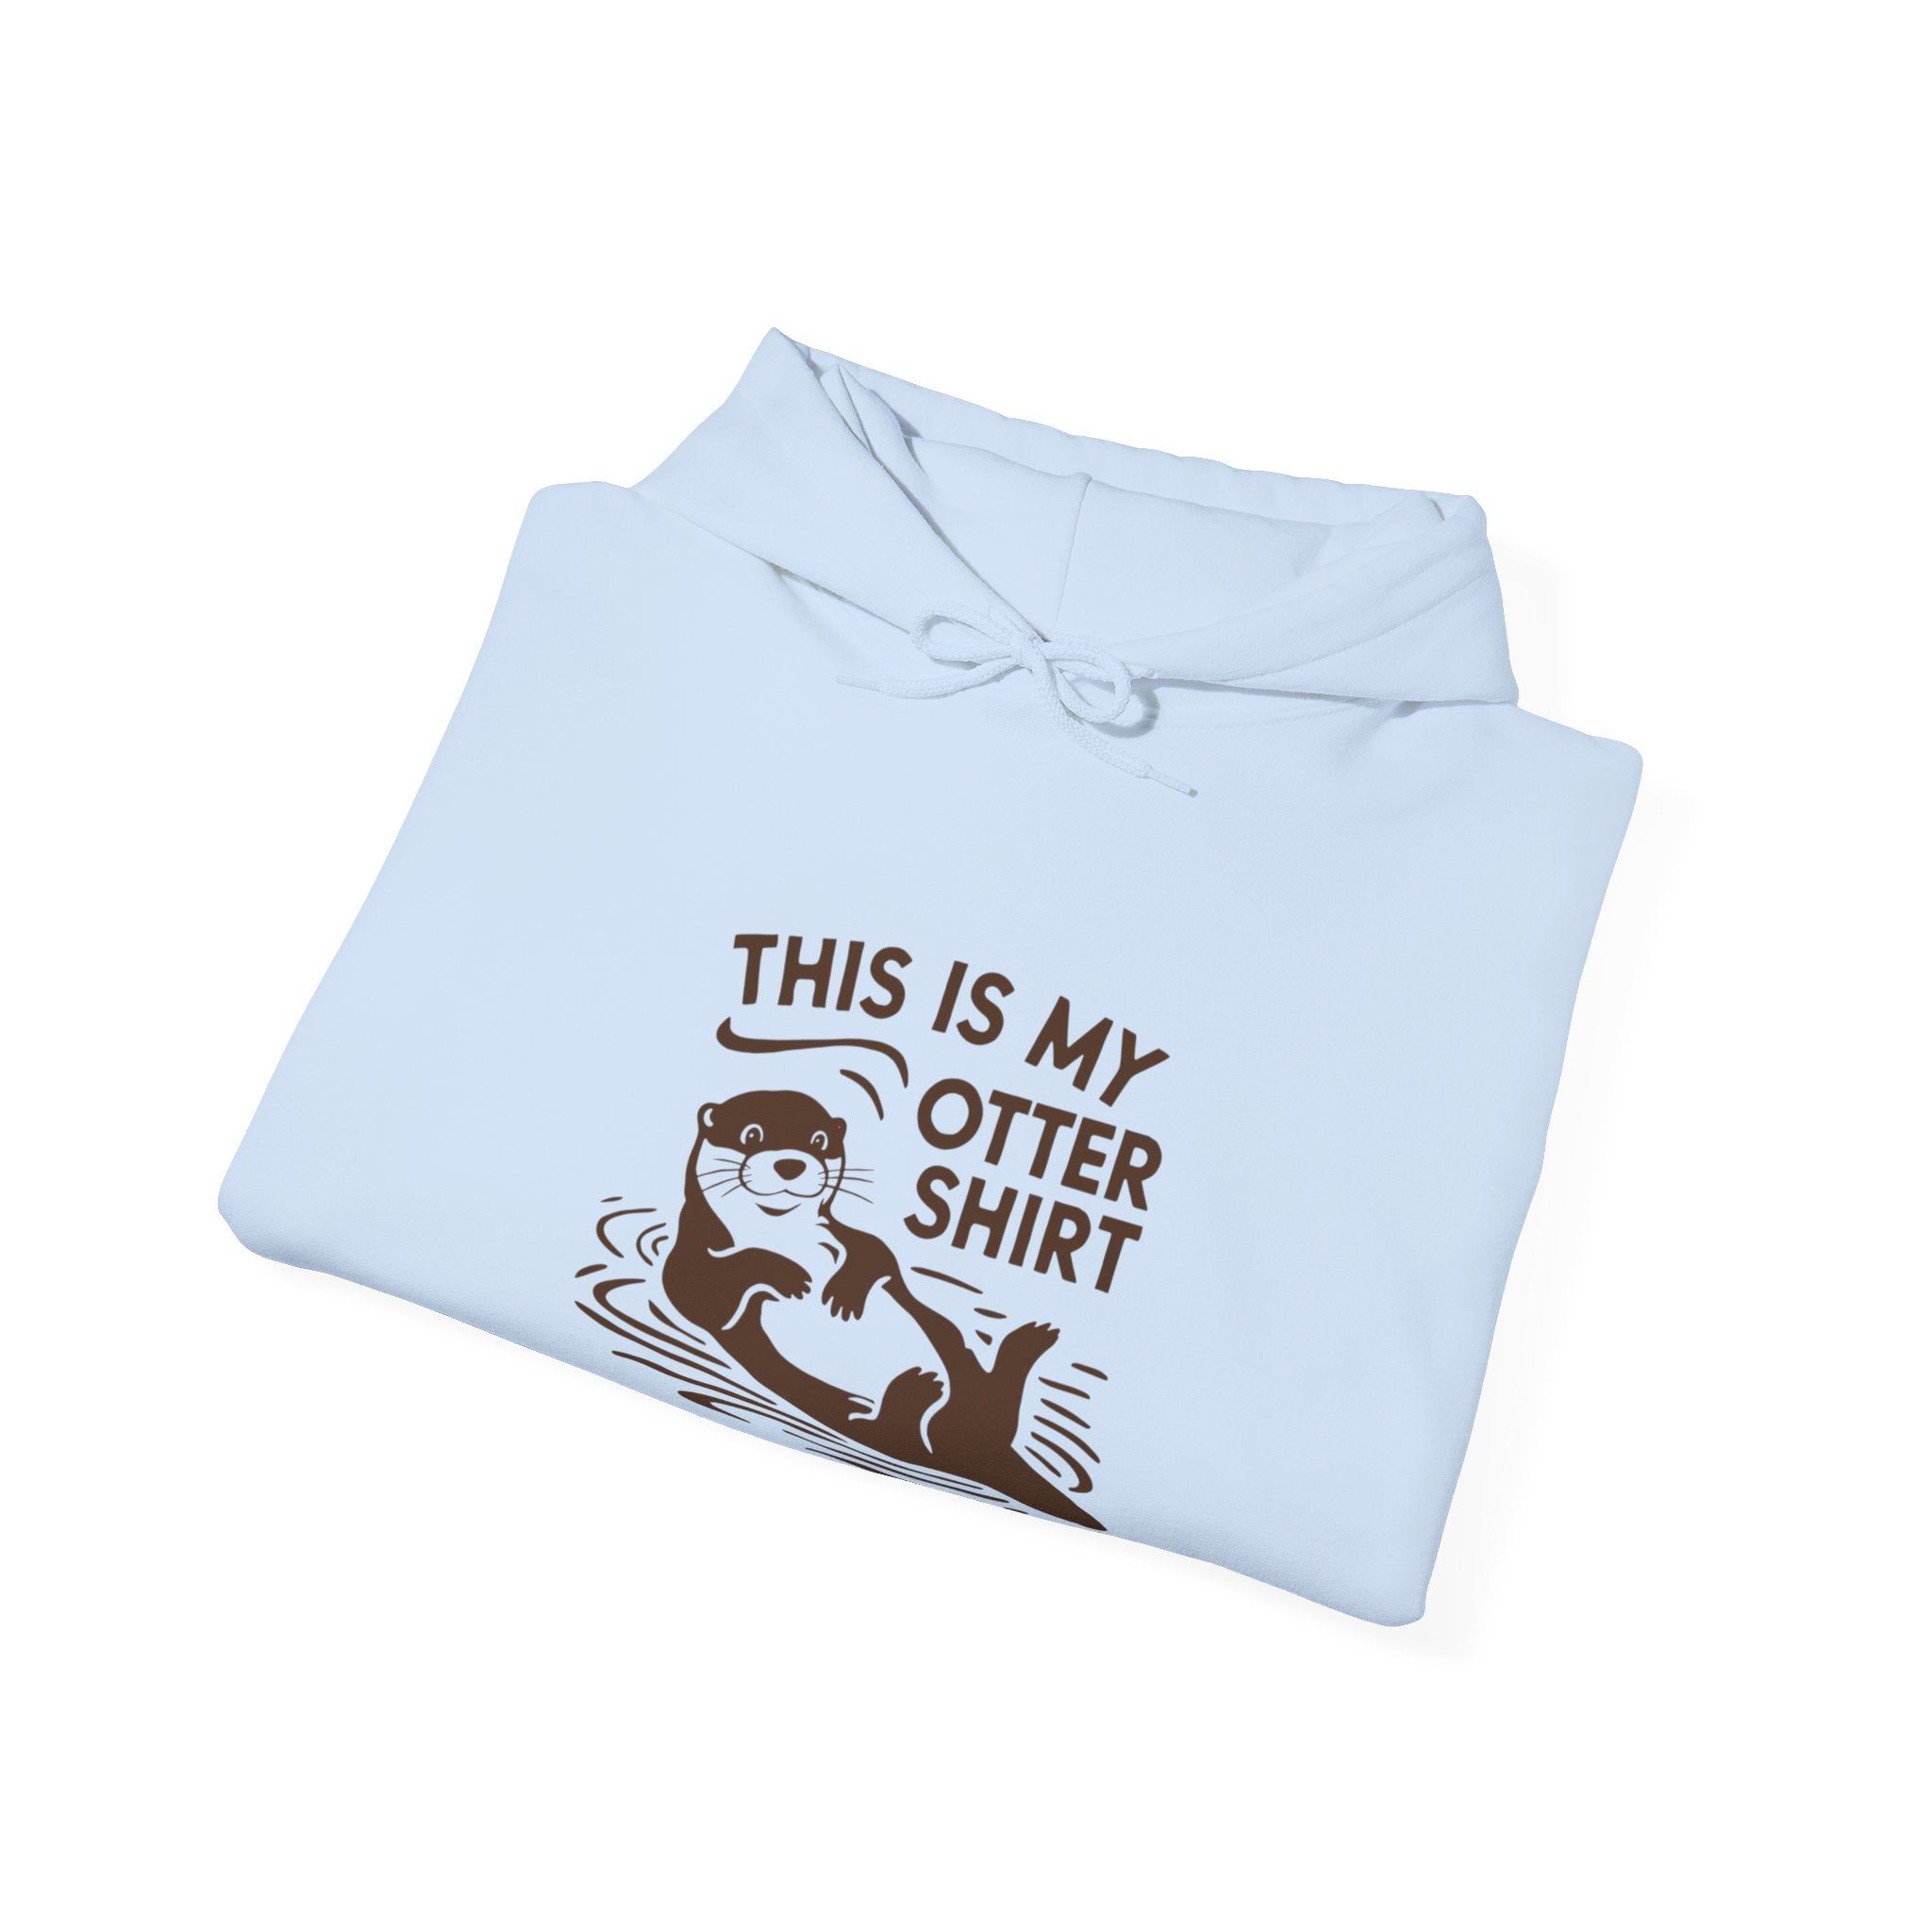 Light blue My Otter Shirt - Hooded Sweatshirt with a classic fit featuring an illustration of an otter lying on its back, surrounded by water, and the text "THIS IS MY OTTER SHIRT" printed in brown.